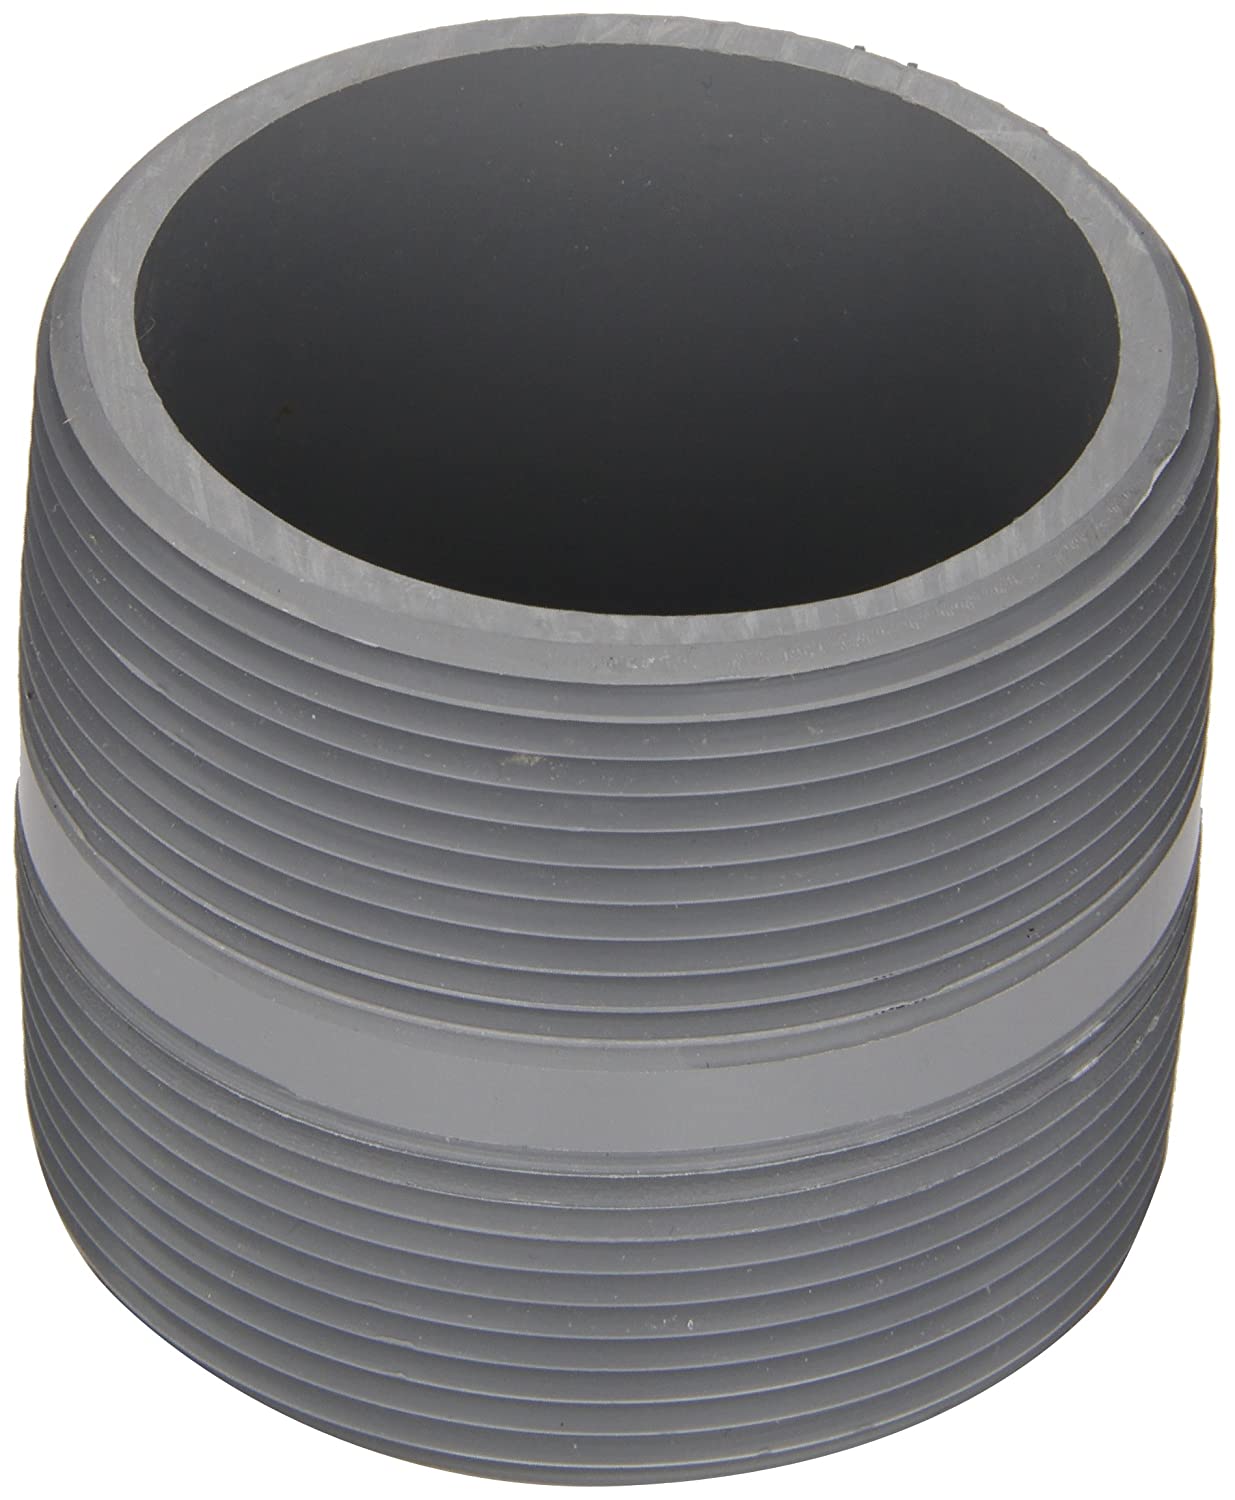 Spears 885-005C - CPVC Pipe Fitting, Close Nipple, Schedule 80, Gray, 1-1/4" NPT Male, 1-5/8" Length